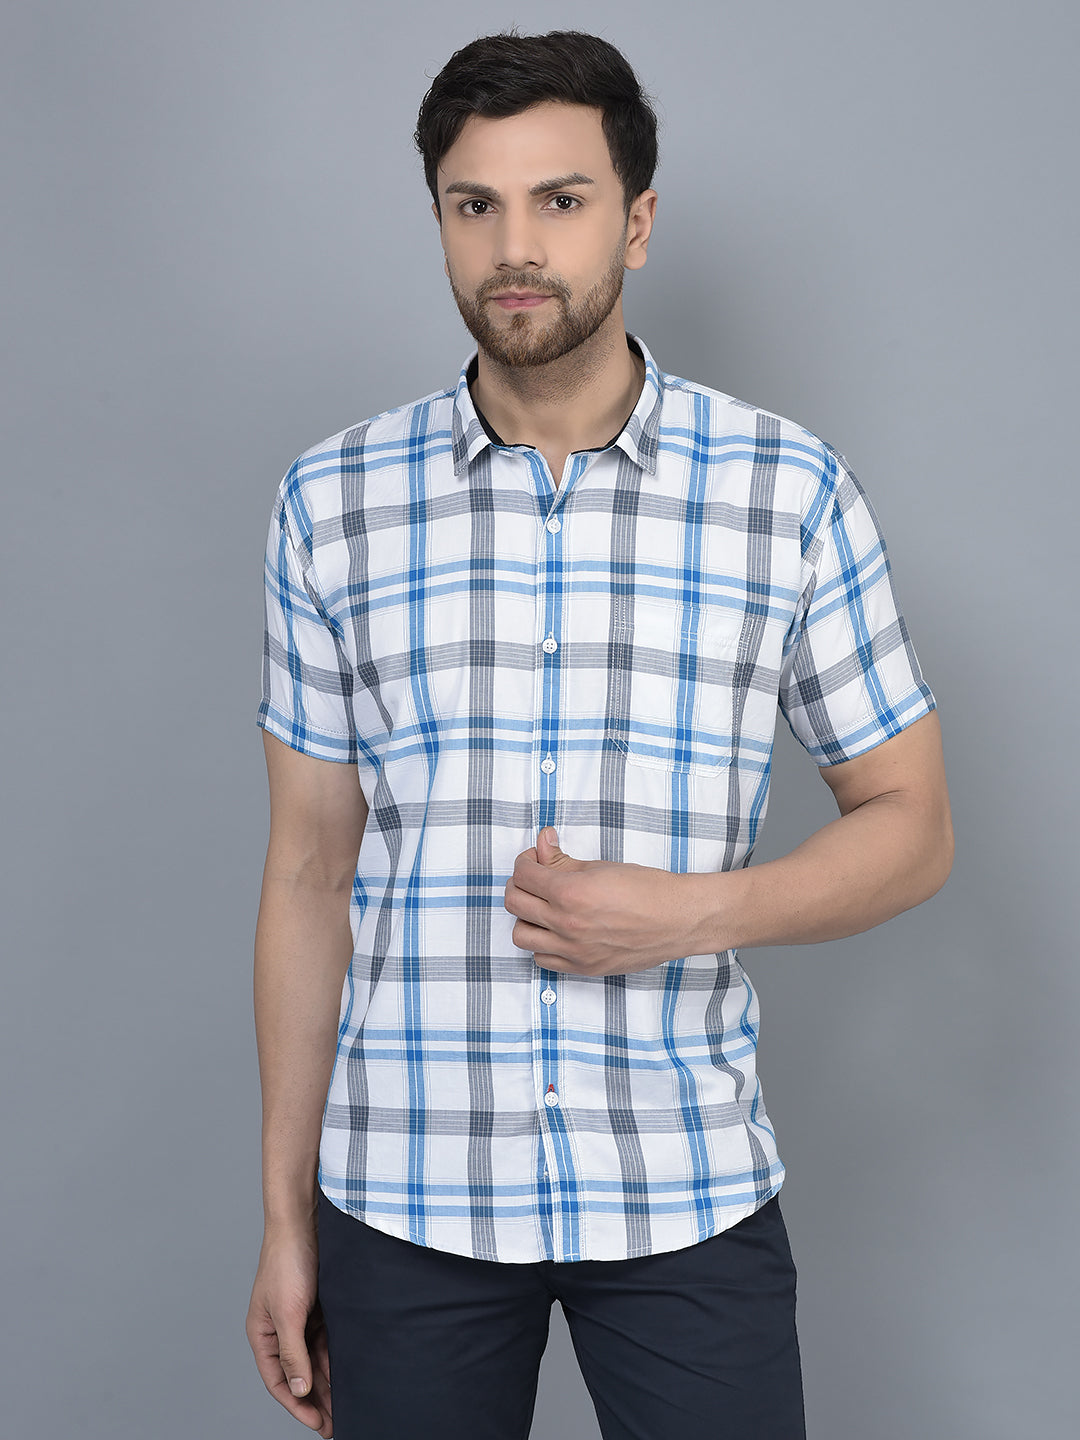 Timeless Elegance with the Cobb White Check Slim Fit Casual Shirt